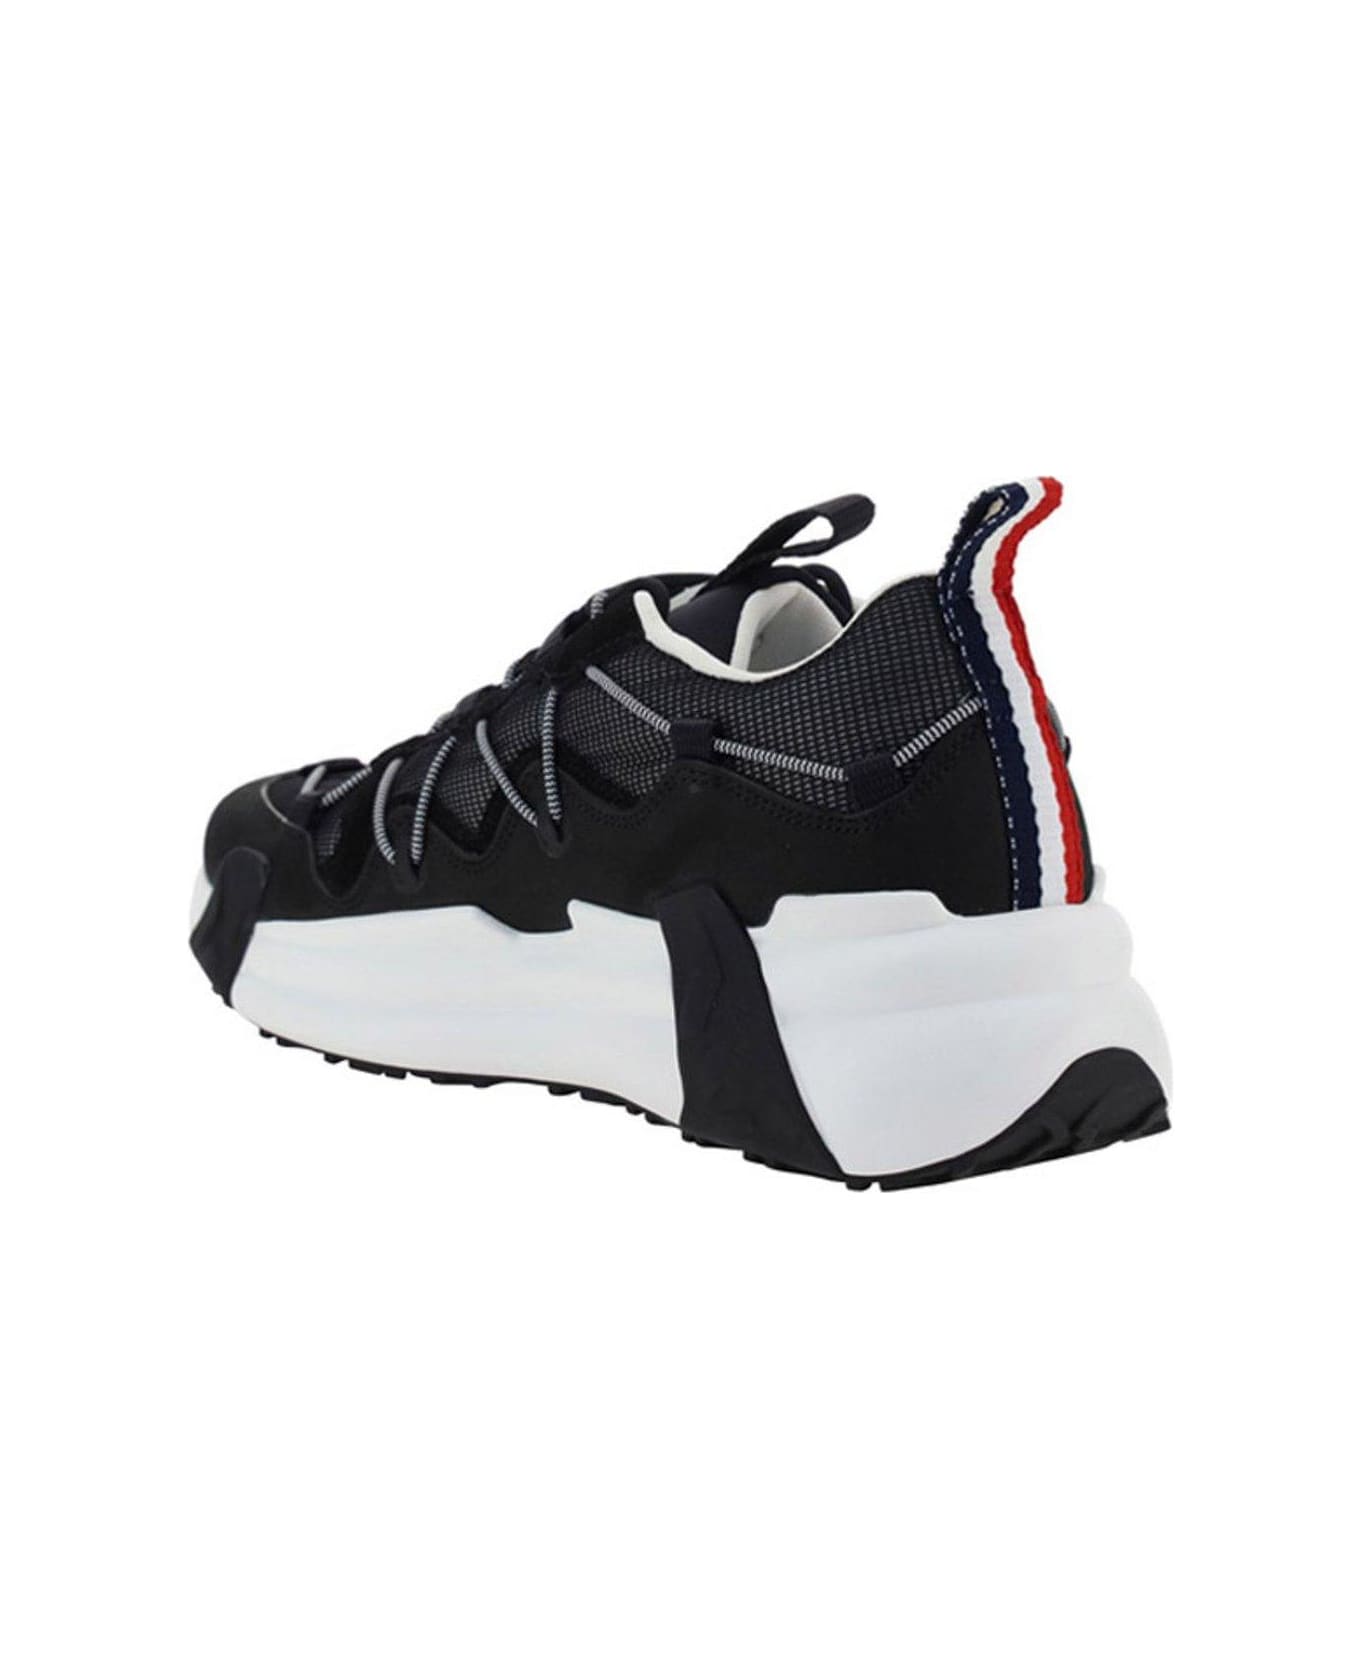 Moncler Compassor Lace-up Sneakers - Nero スニーカー